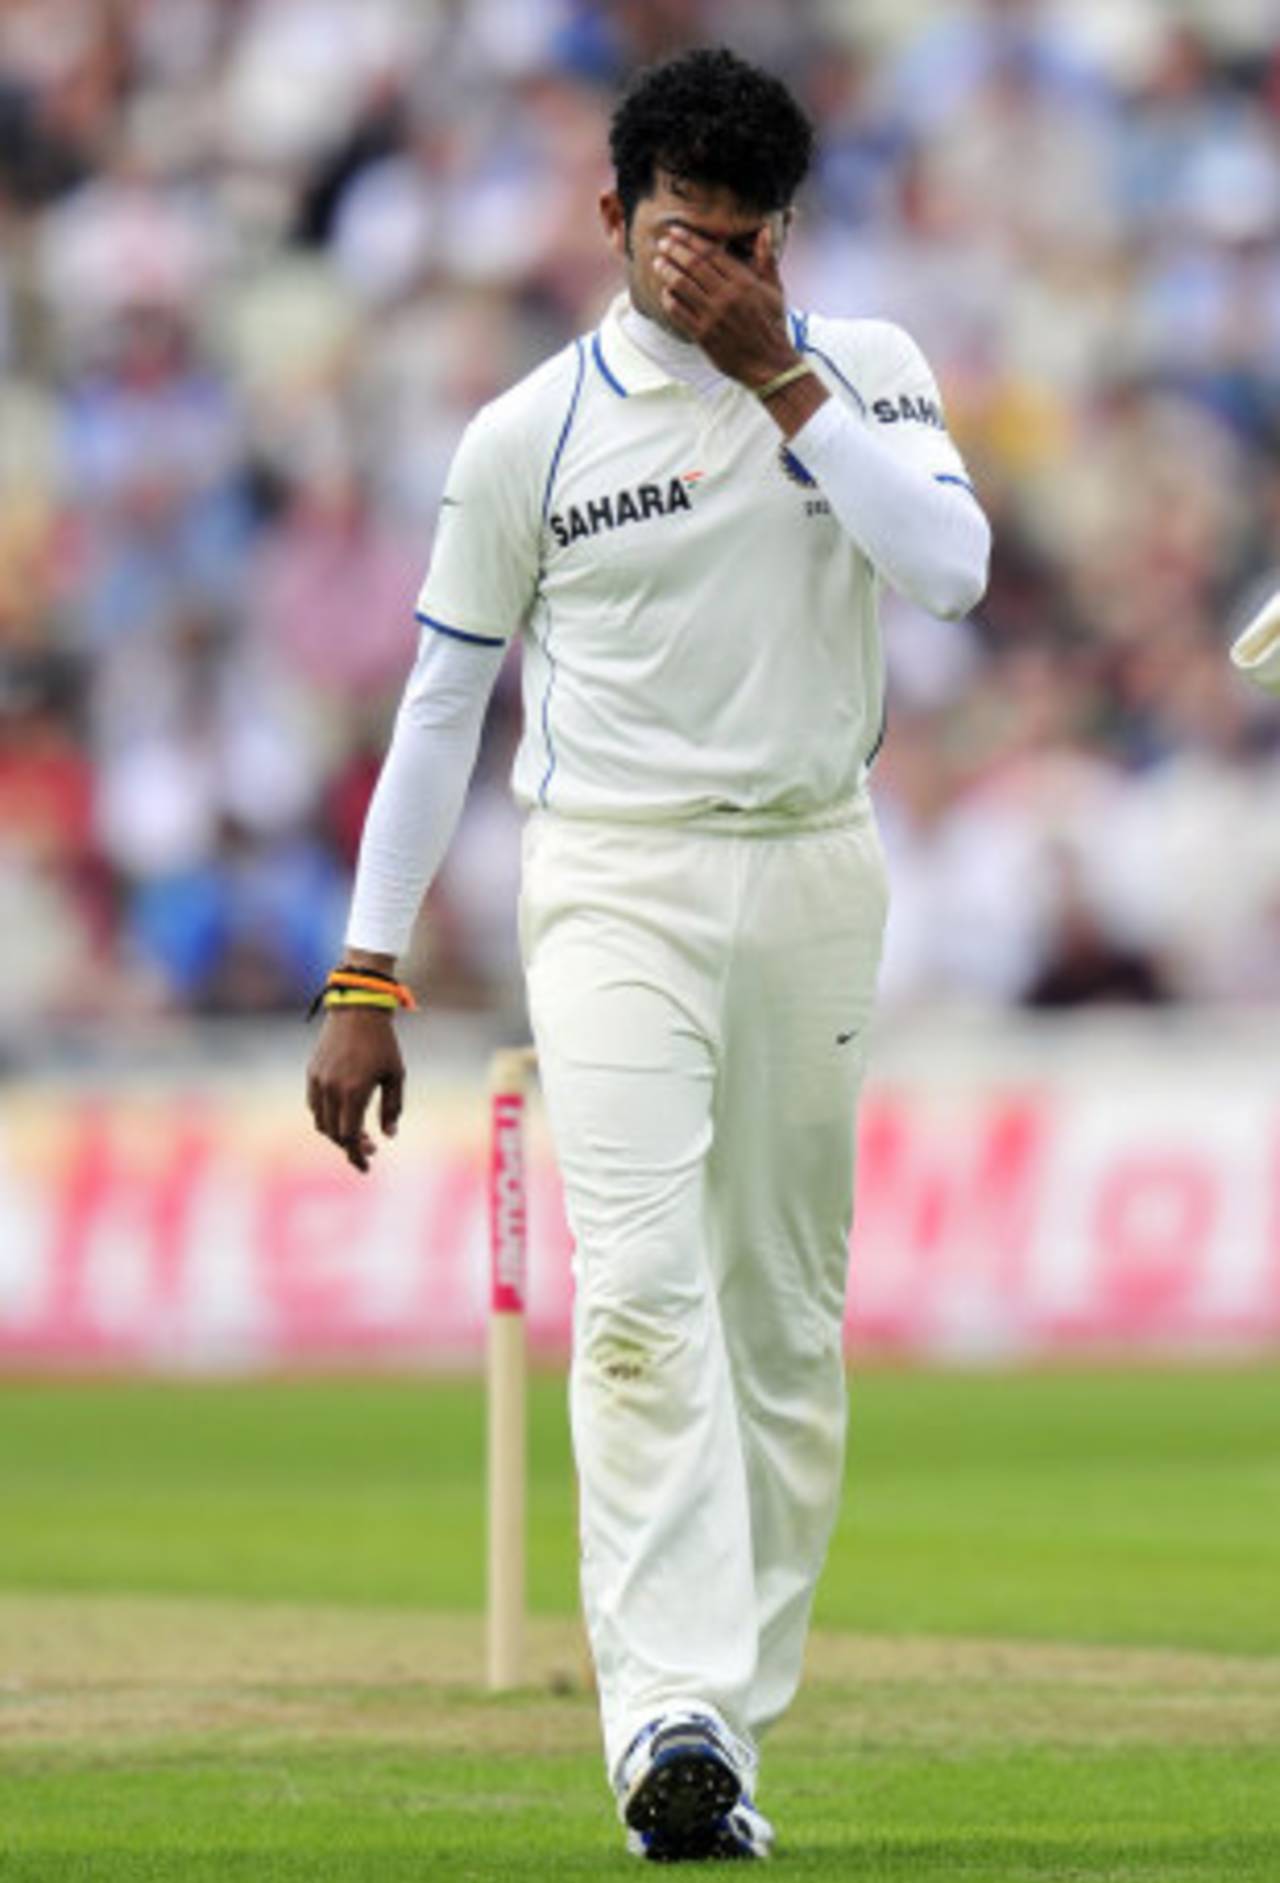 Sreesanth shows his disappointment on a difficult day, England v India, 3rd npower Test, Edgbaston, 2nd day, August 11, 2011